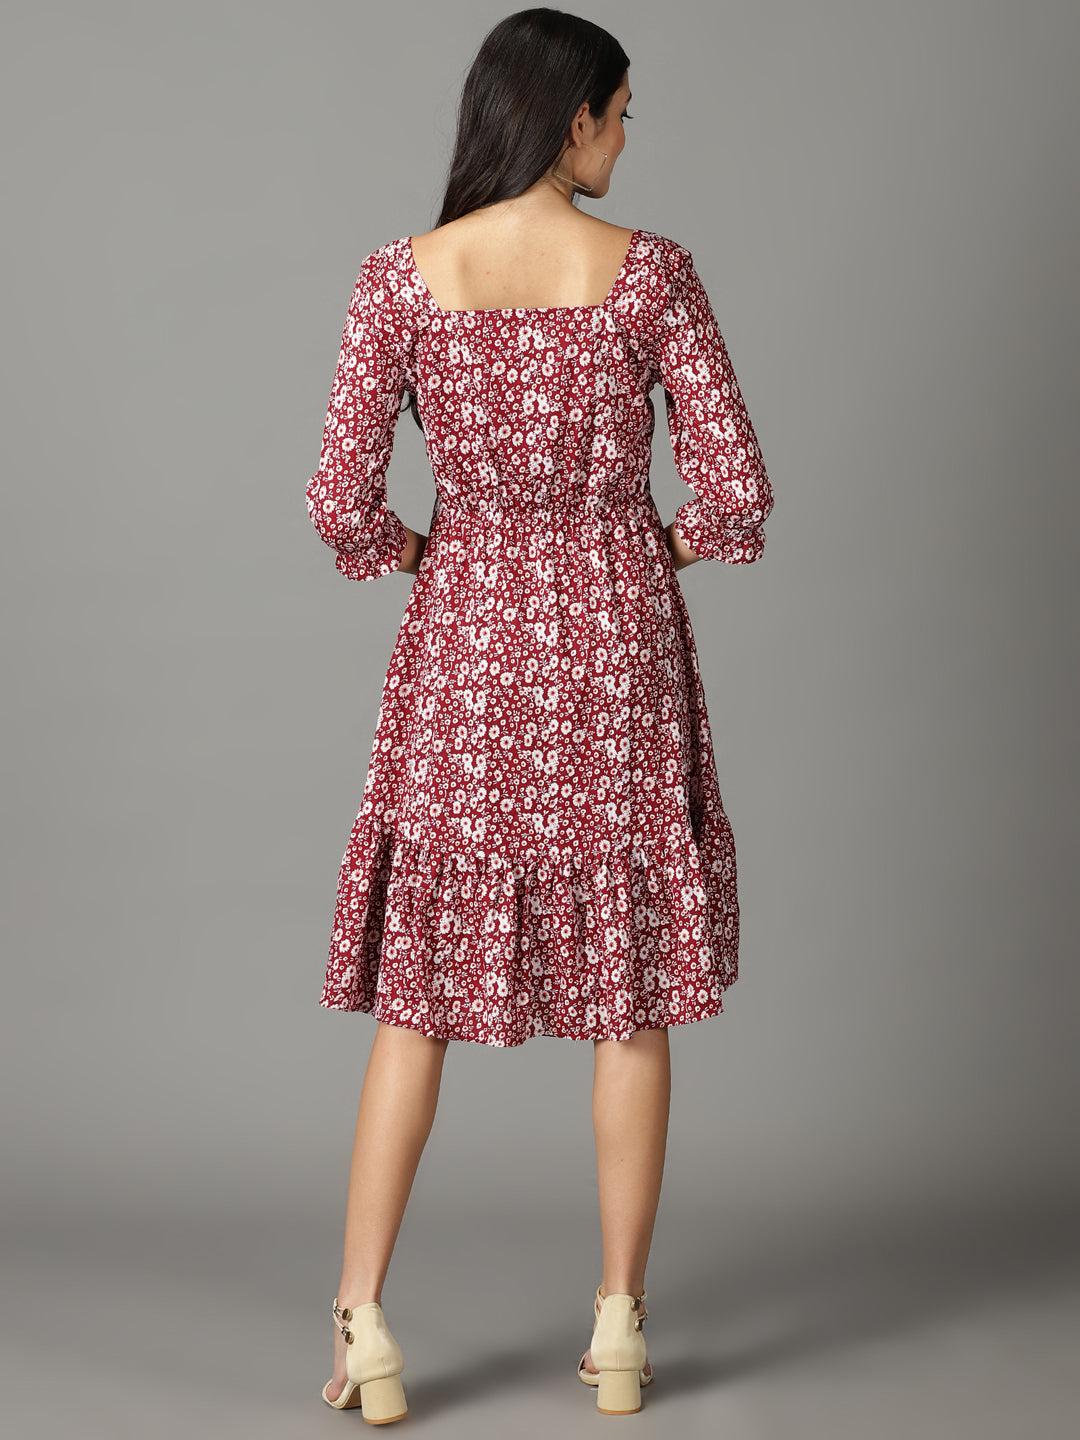 Women's Maroon Printed Fit and Flare Dress